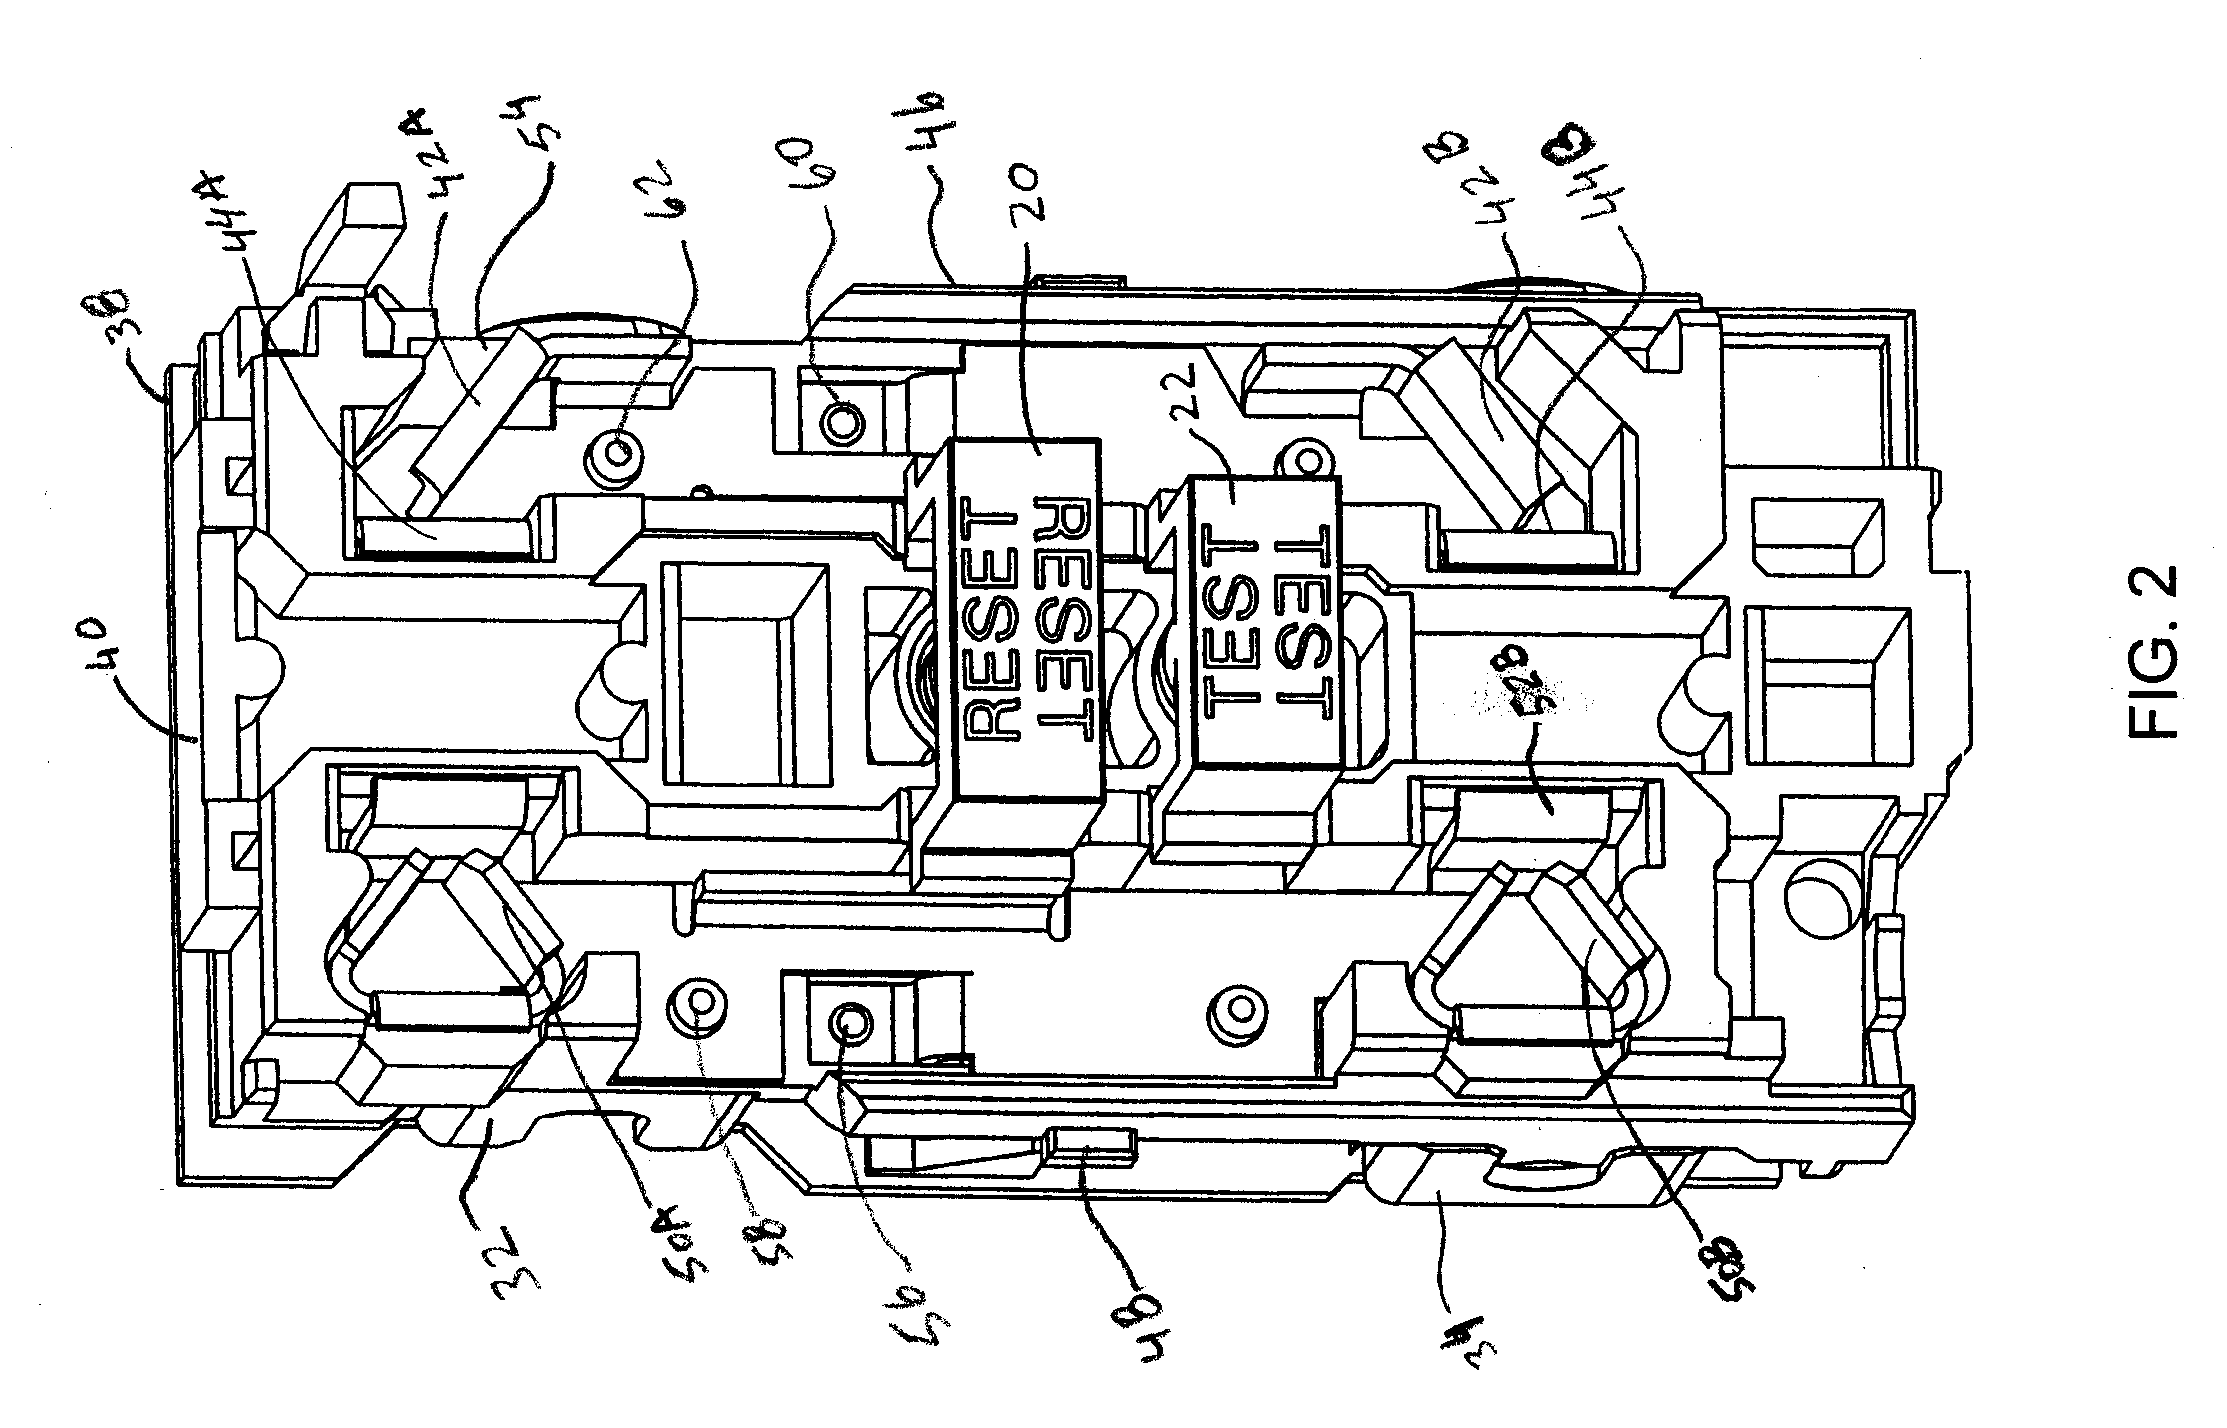 Tamper resistant ground fault circuit interrupter receptacle having dual function shutters